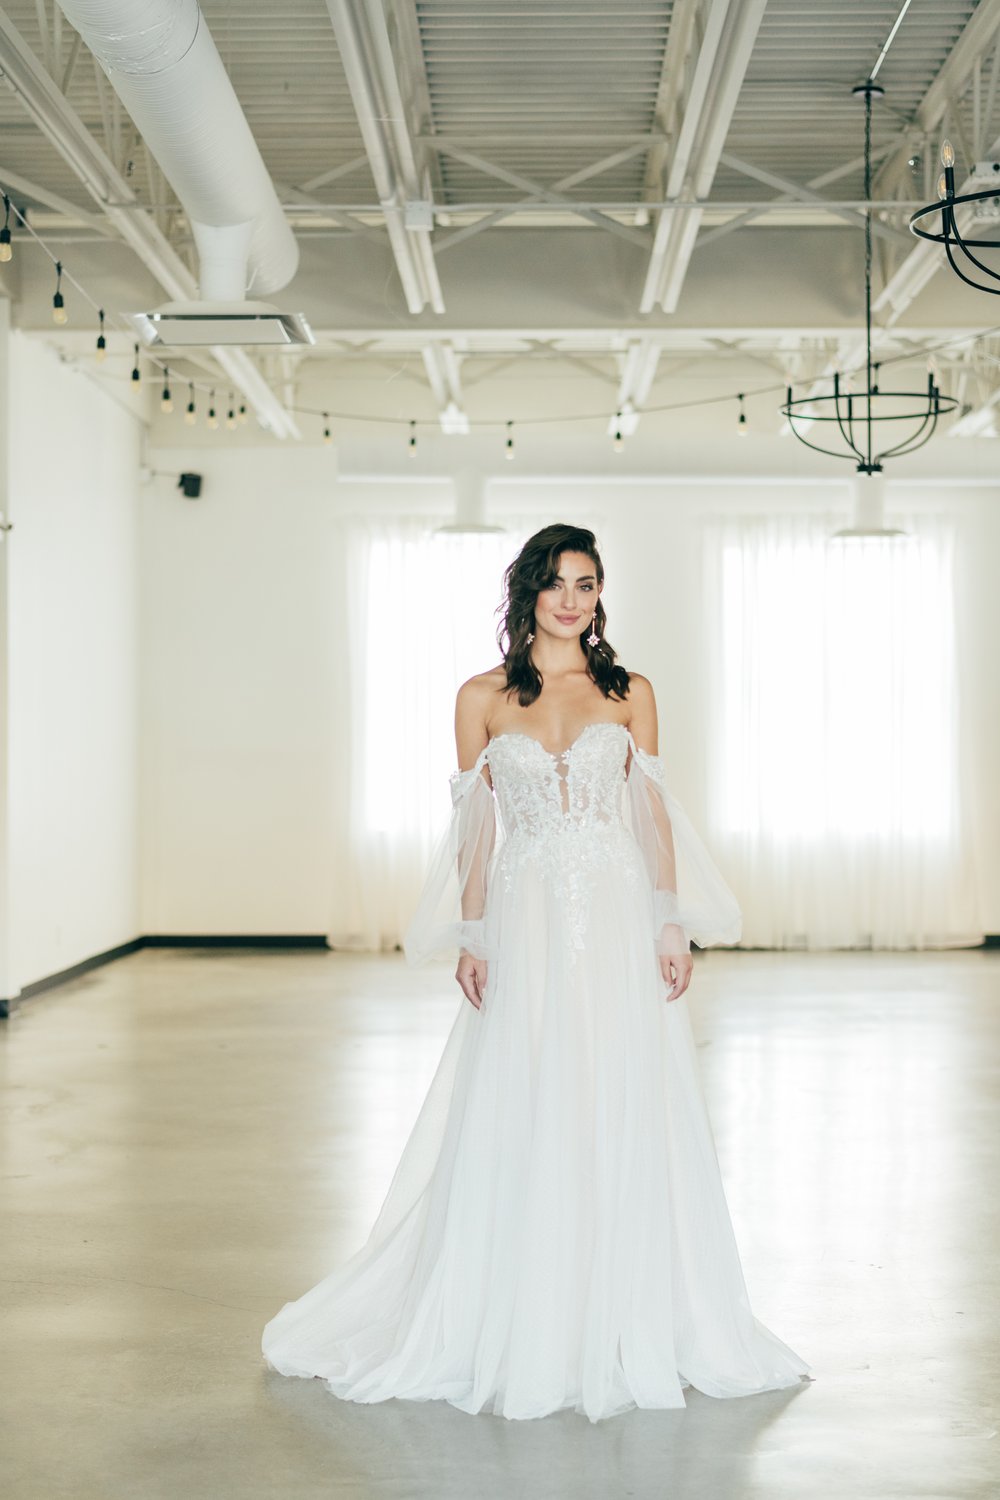 2022 Bridal Gowns by Calgary designer Lis Simon, Brontë Bride favourite Canadian bridal designers, poofy sleeves and romantic lace